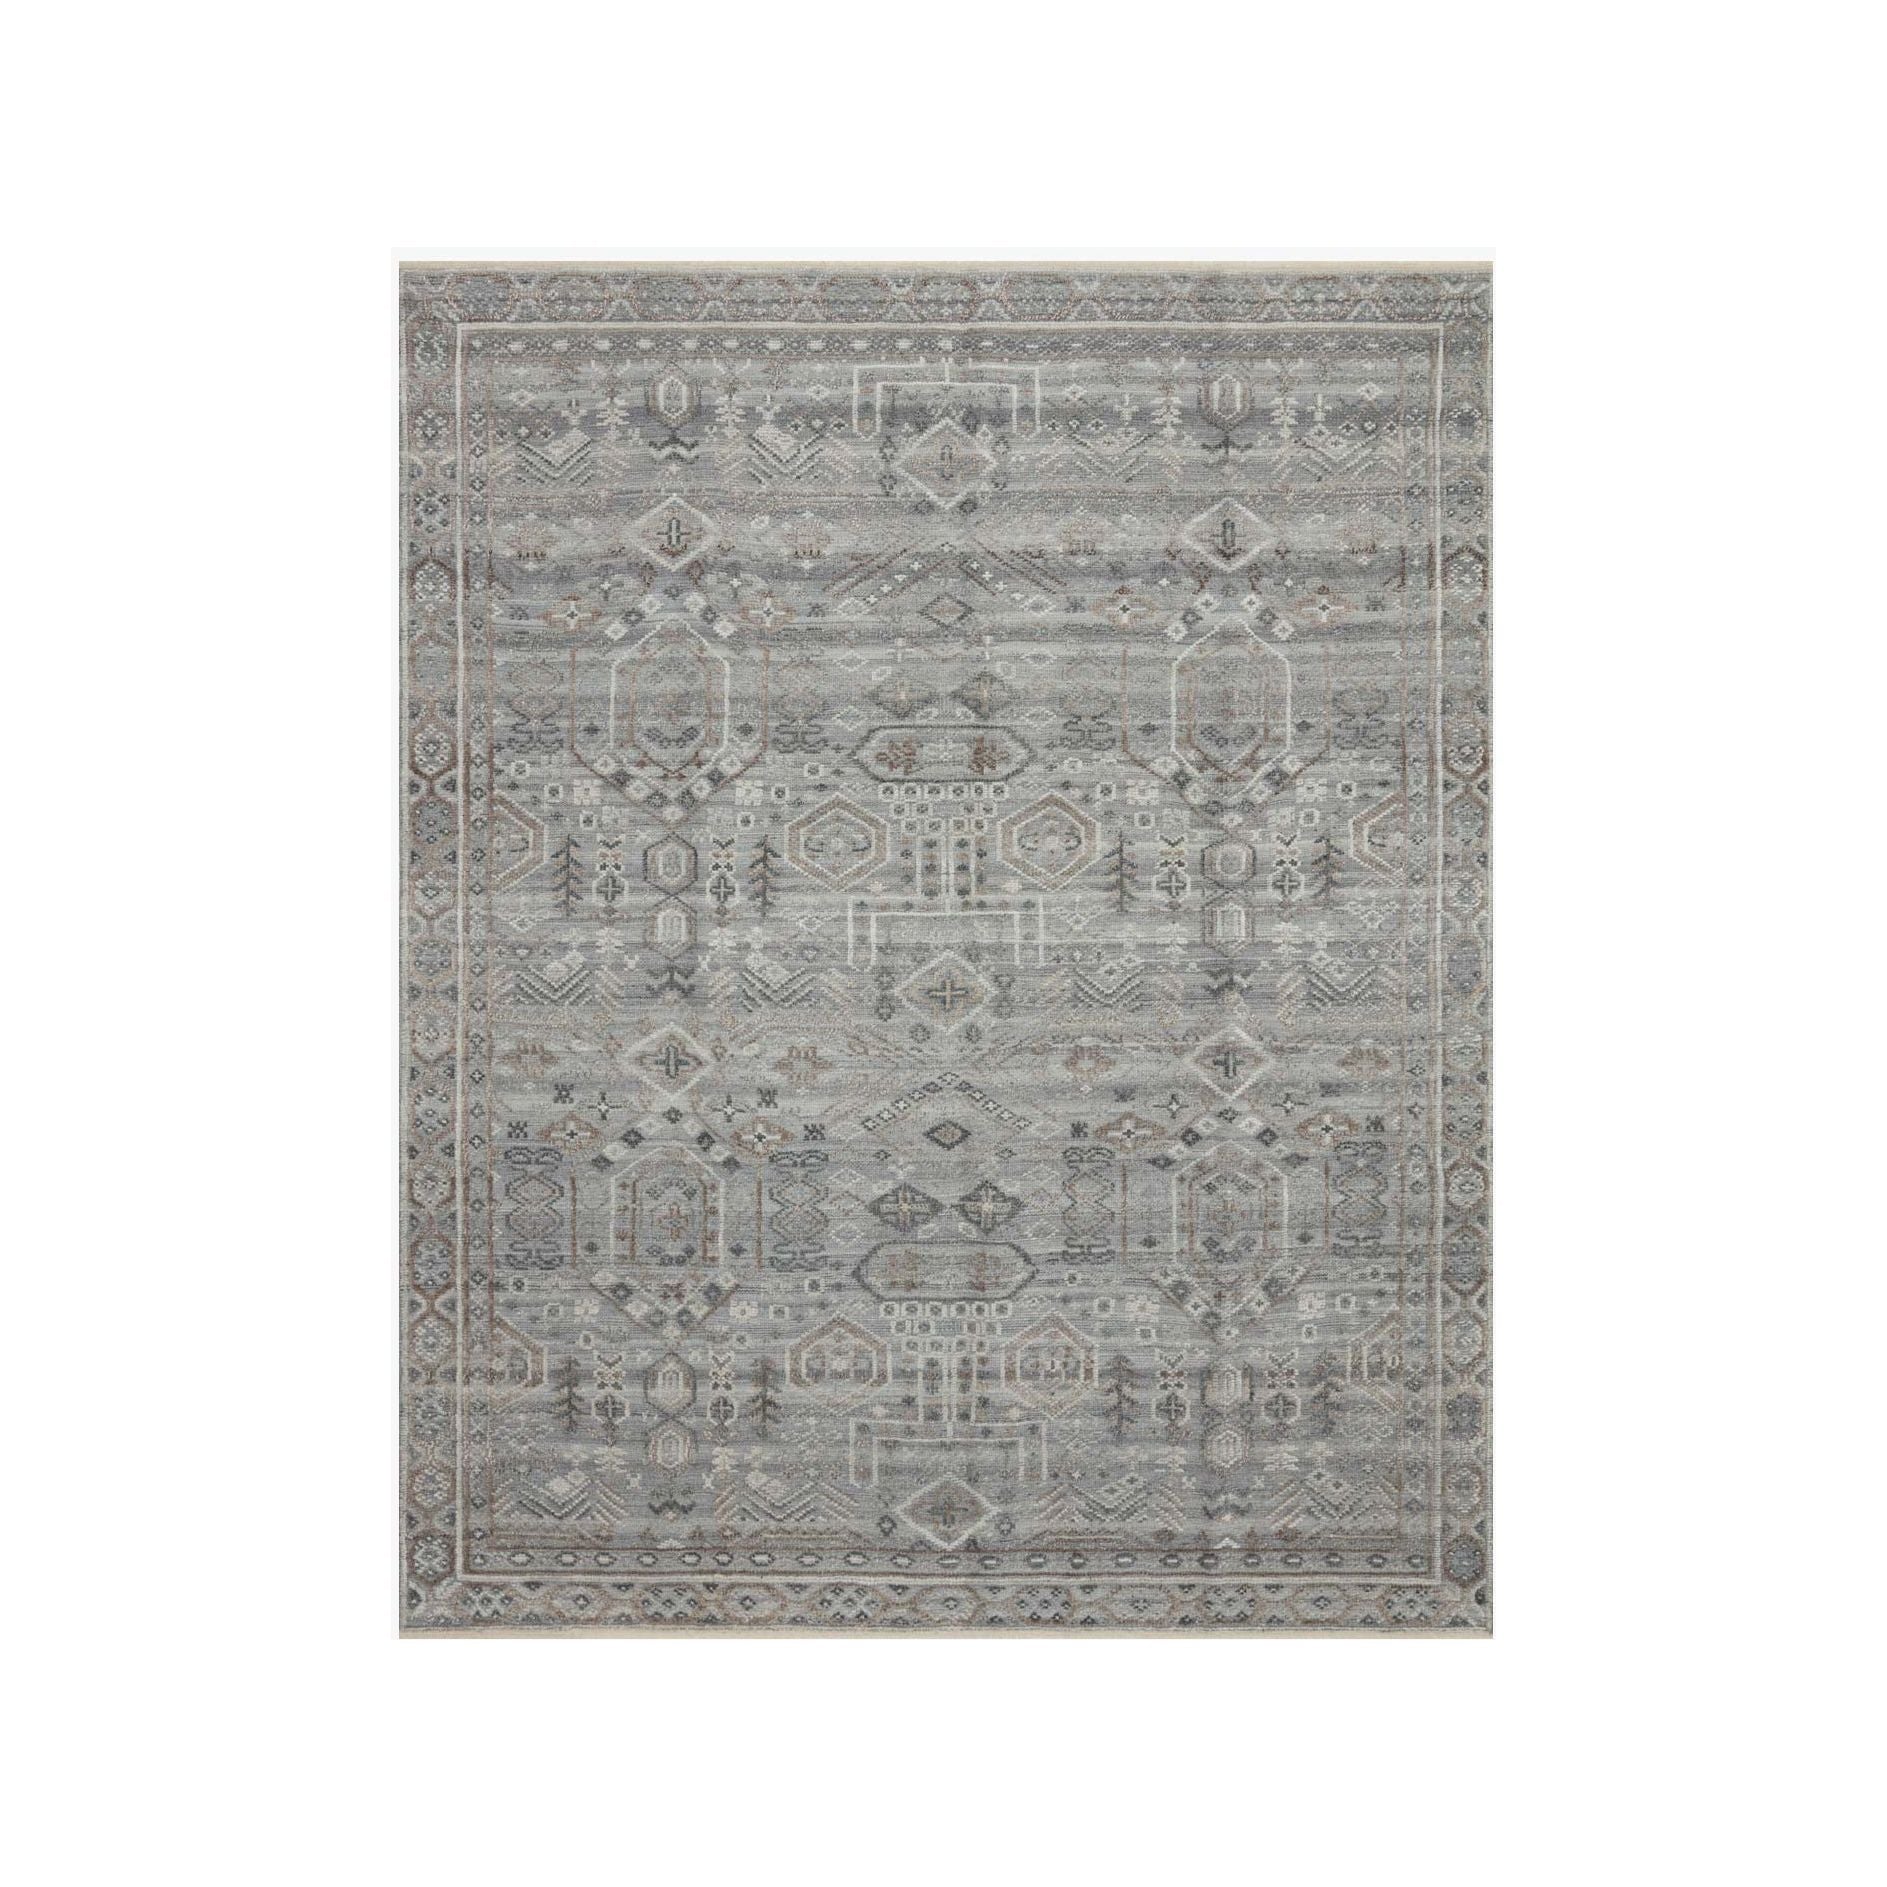 Timeless yet modern, the Nola Slate / Granite Area Rug is hand-knotted in India of viscose, cotton, wool and other fibers. The tonal collection showcases an elevated texture, accentuating the pattern in every piece.  Hand Knotted 66% Viscose | 25% Wool | 7% Cotton | 2% Other Fiber Pile NOL-01 Slate / Granite